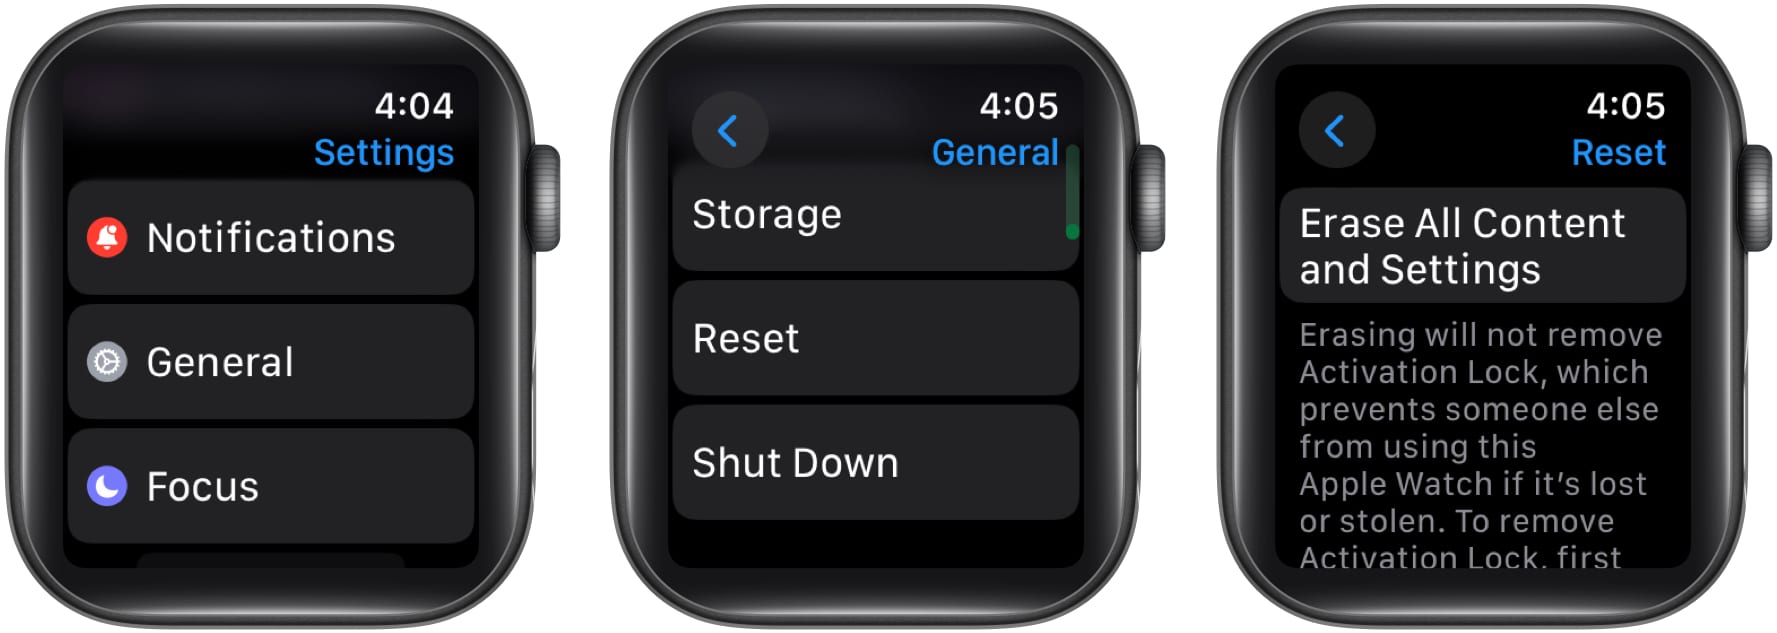 Go to General, select Reset and tap on Erase All Content and Settings on Apple Watch